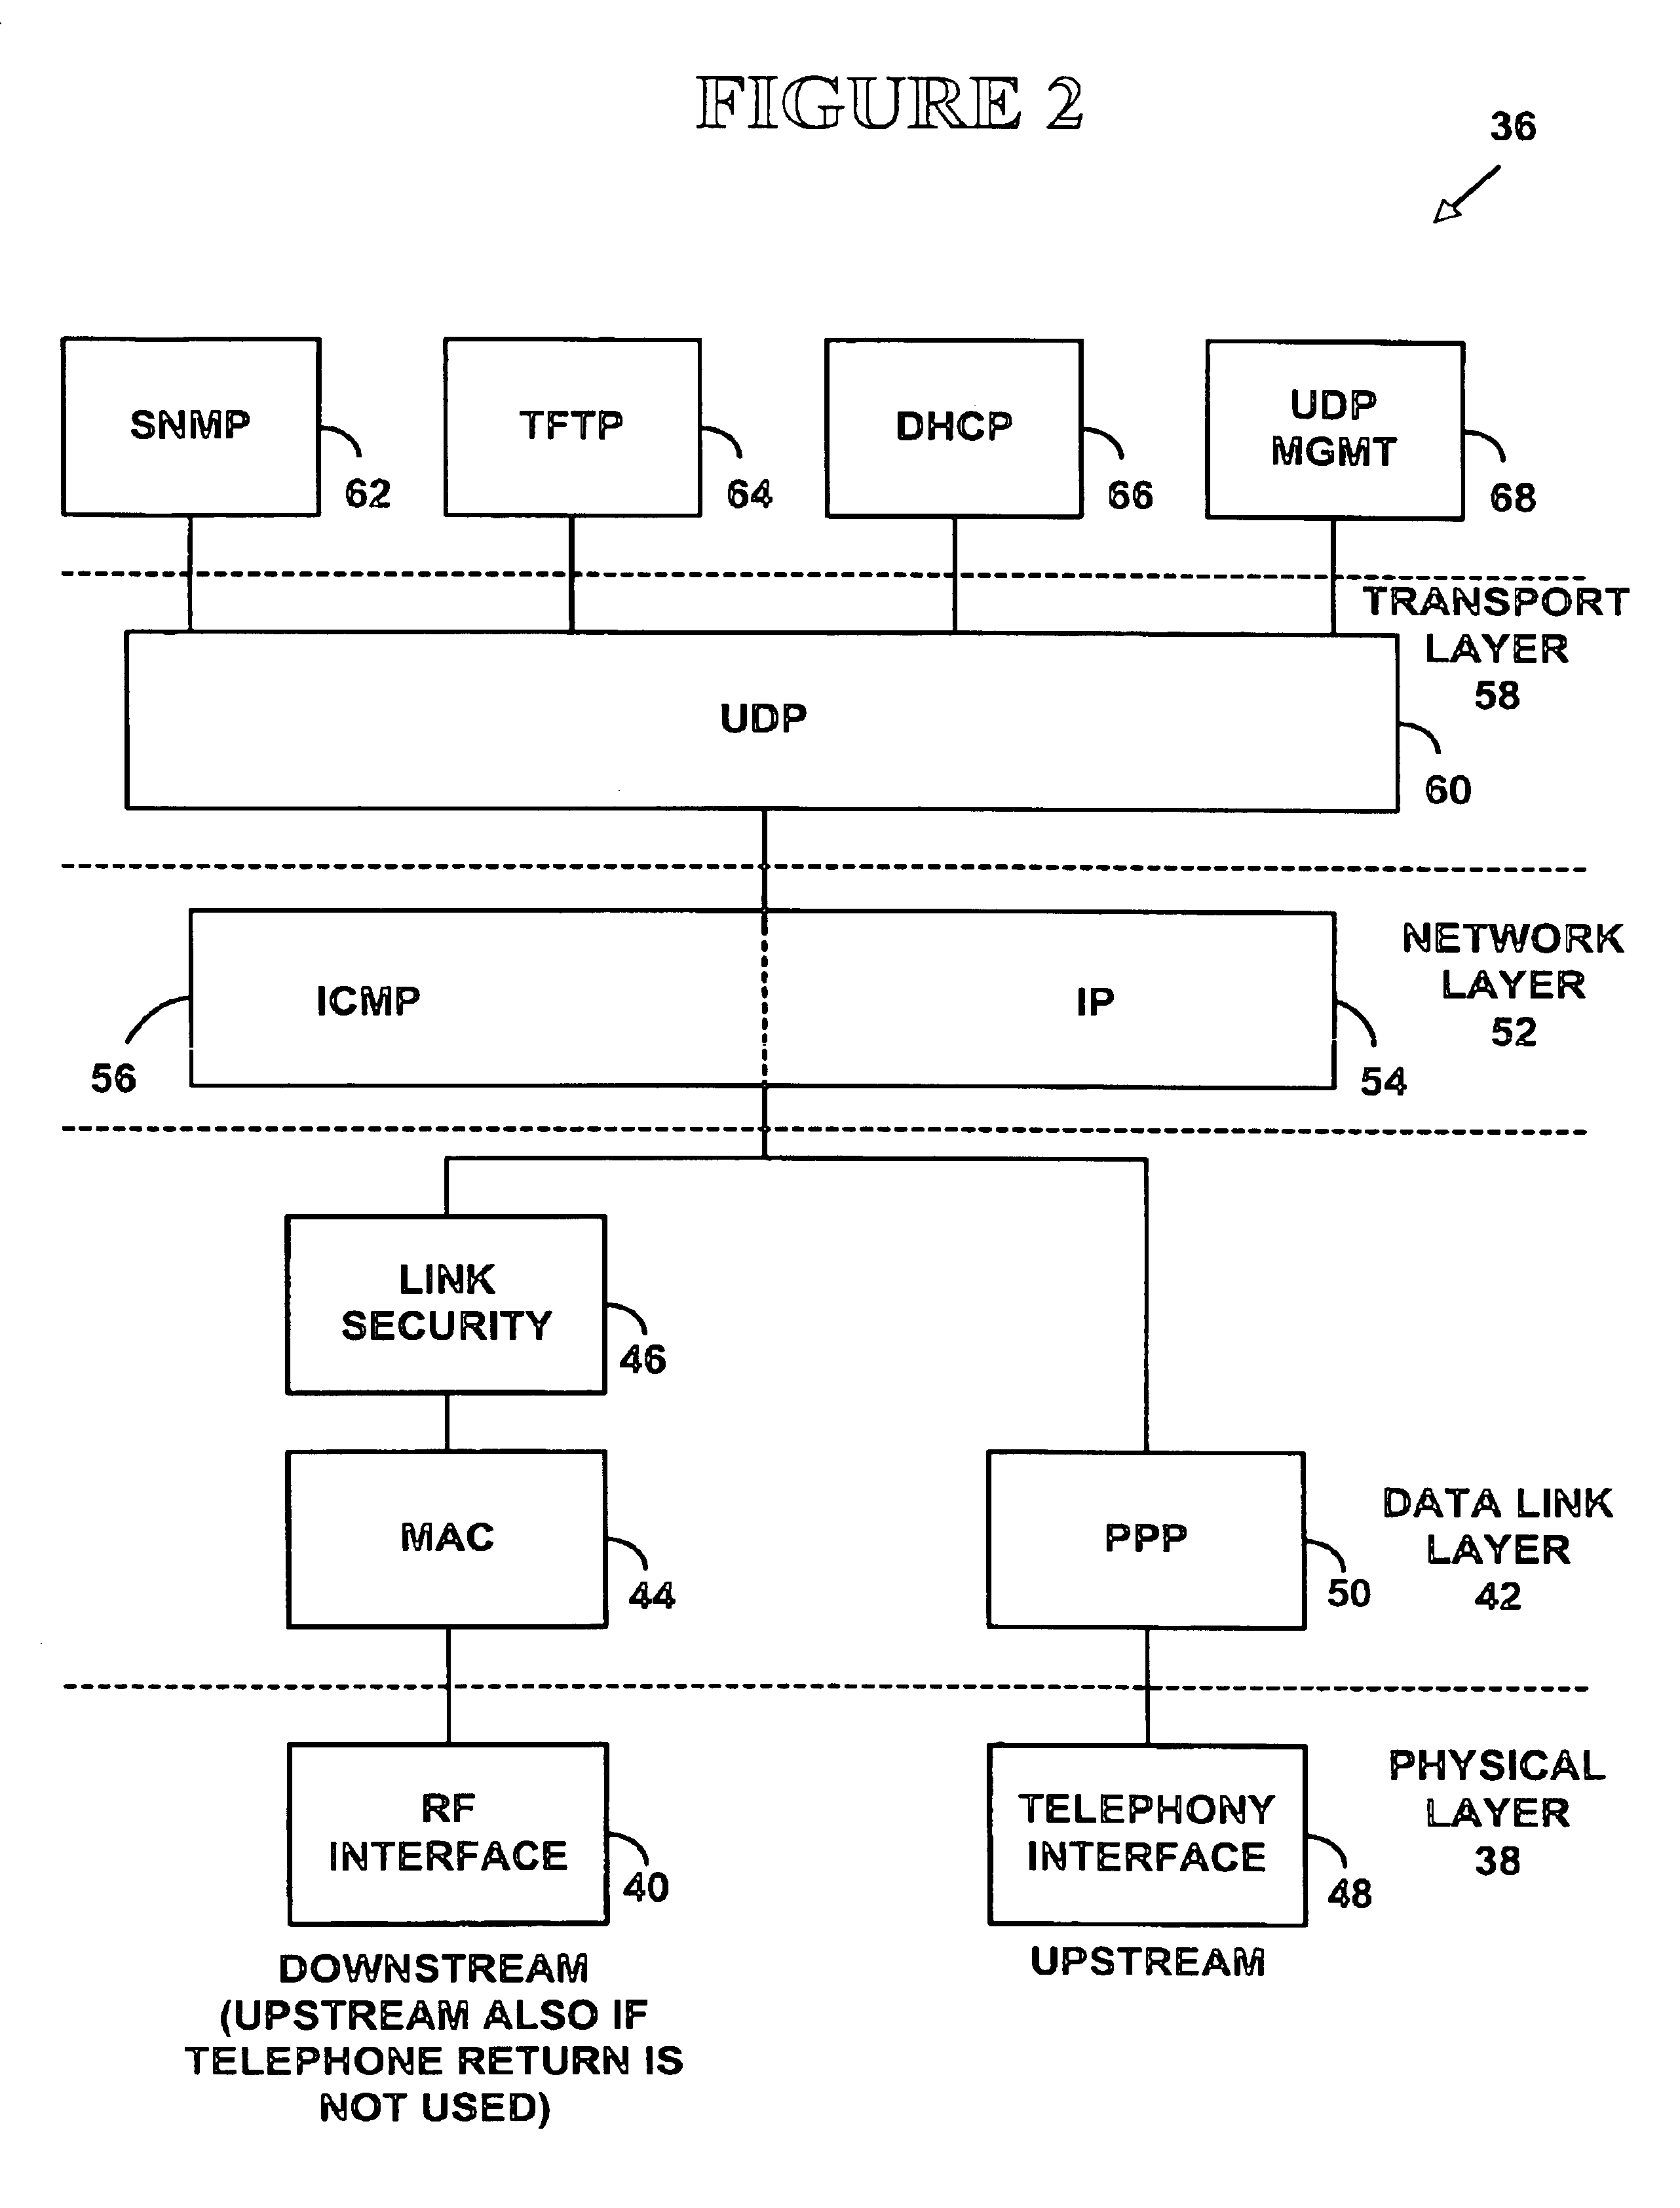 System and method for a specialized dynamic host configuration protocol proxy in a data-over-cable network